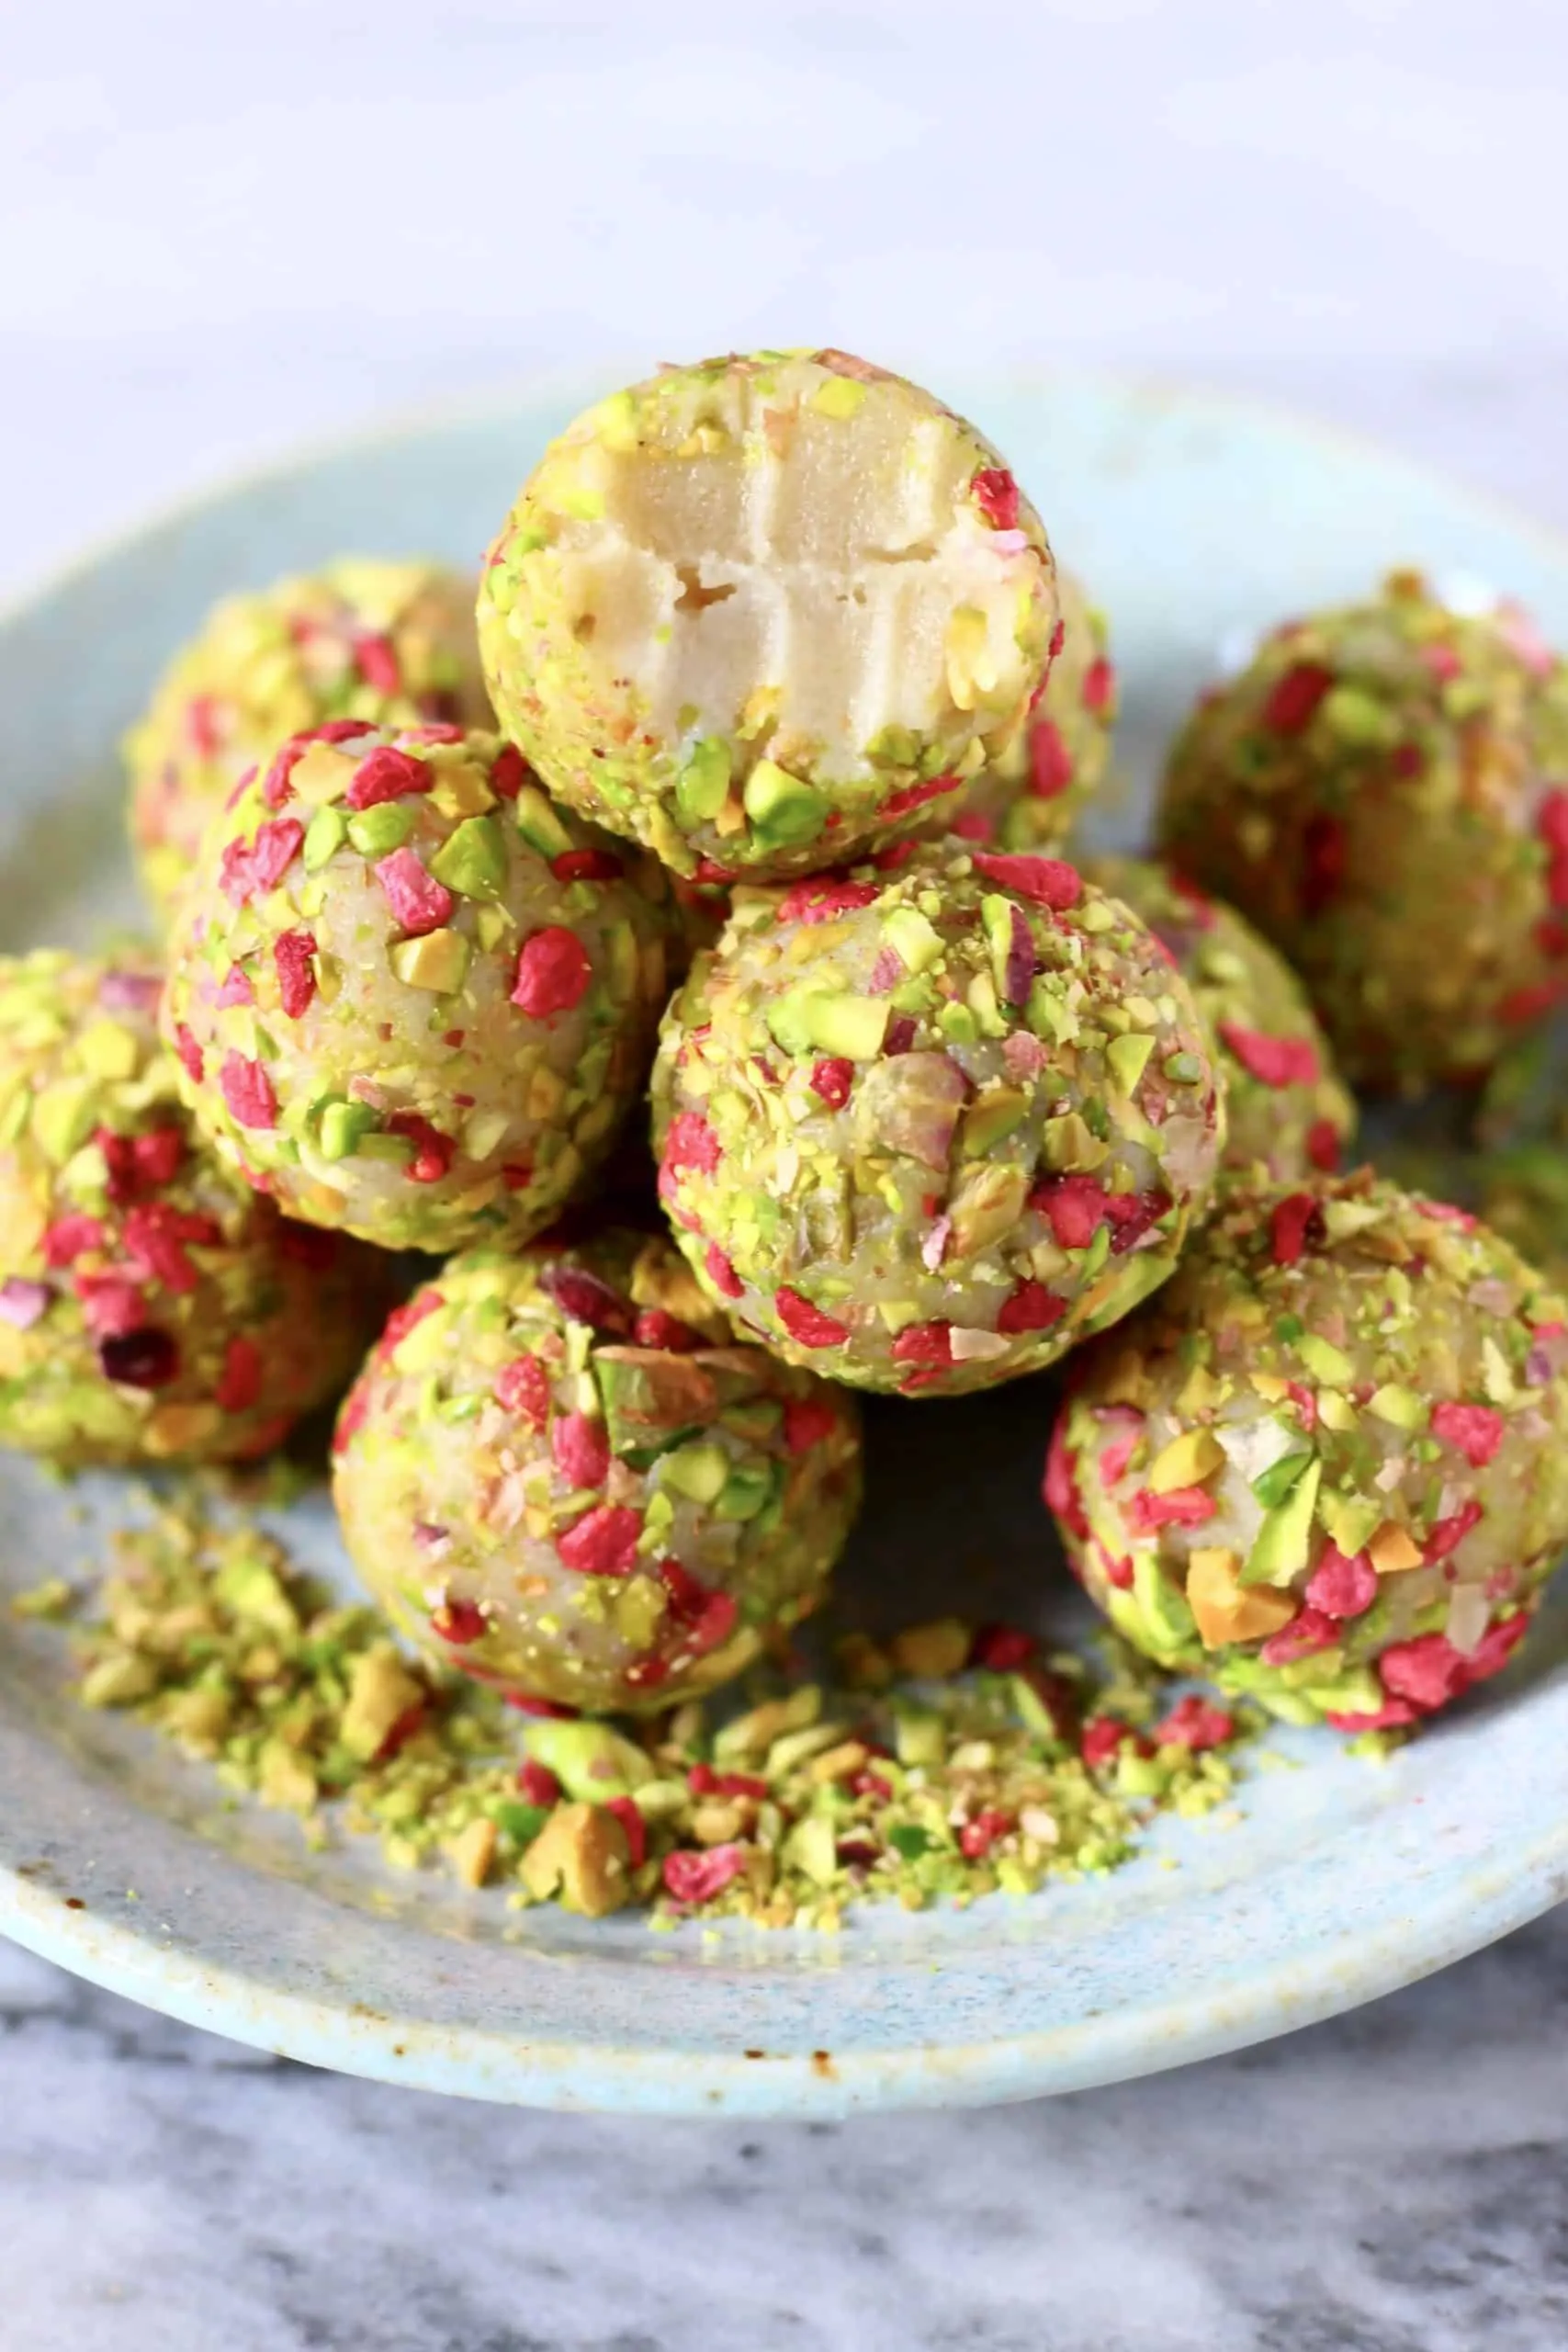 A pile of white chocolate truffles covered in chopped pistachios and freeze-dried raspberries with a bitten one